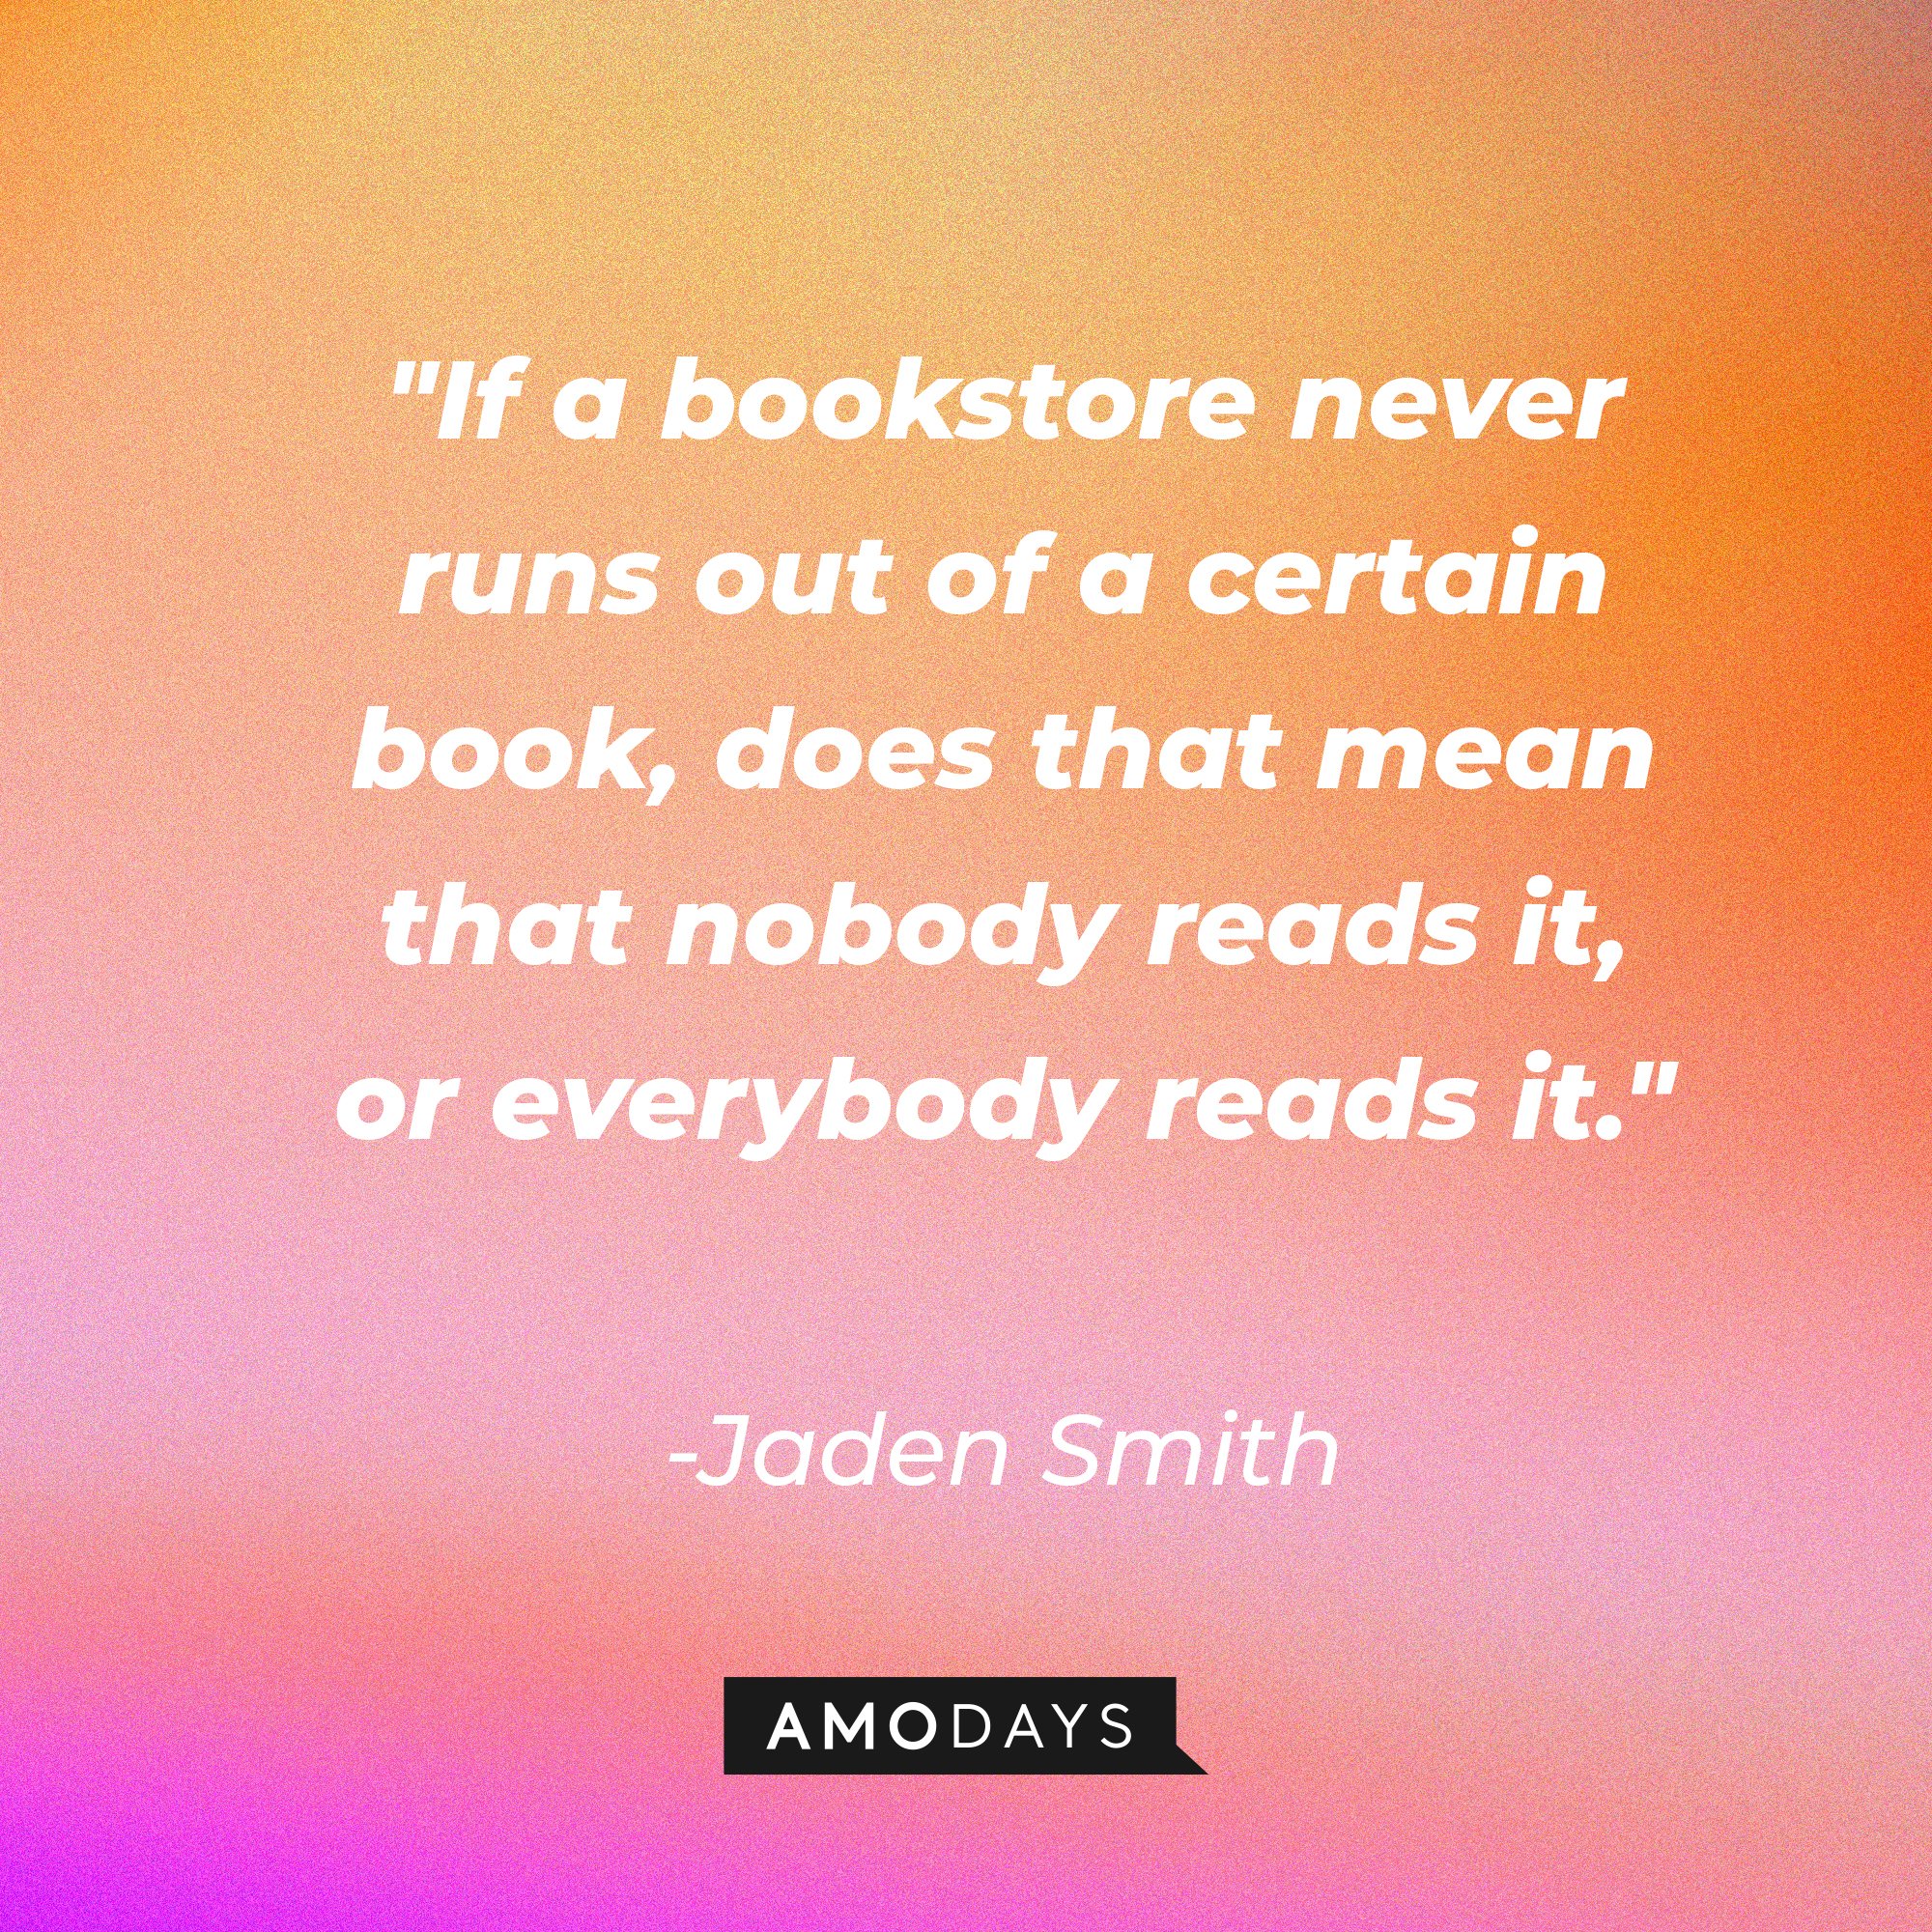 Jaden Smith's quote: "If a bookstore never runs out of a certain book, does that mean that nobody reads it, or everybody reads it." | Image: AmoDays